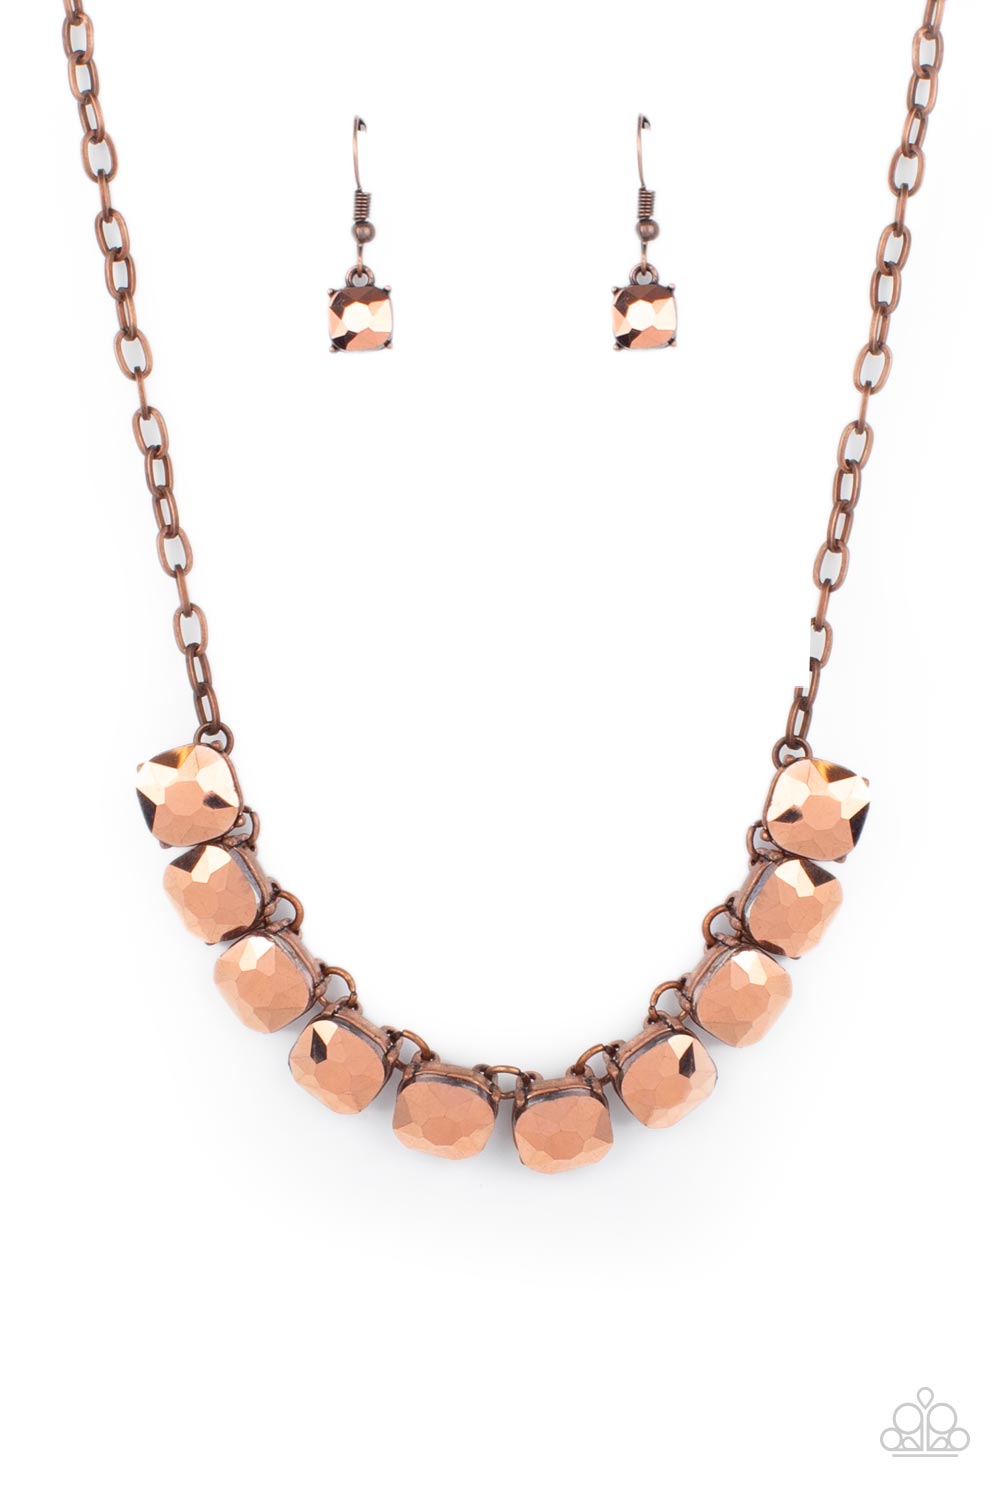 Radiance Squared - copper - Paparazzi necklace